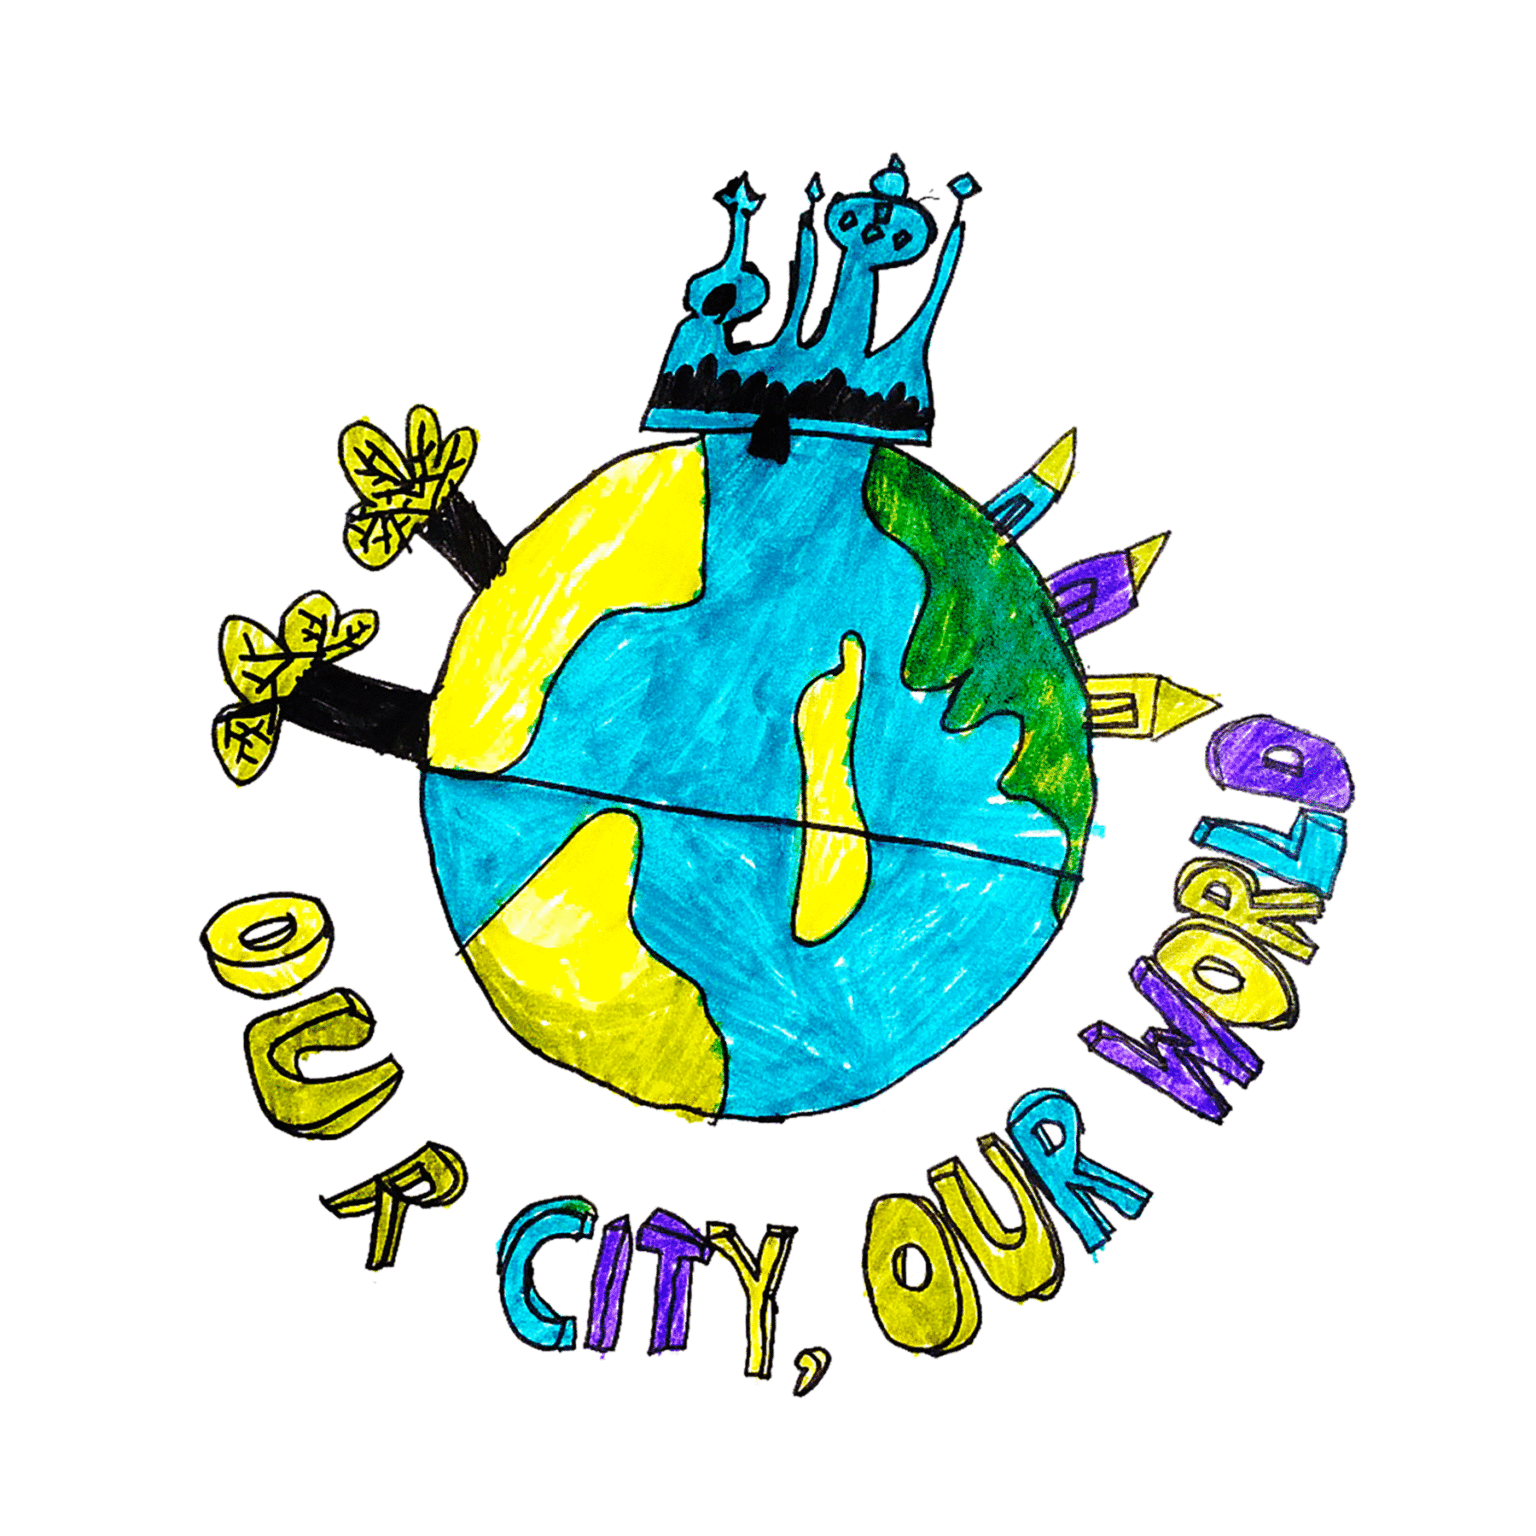 Our City, Our World Logo – Our City, Our World